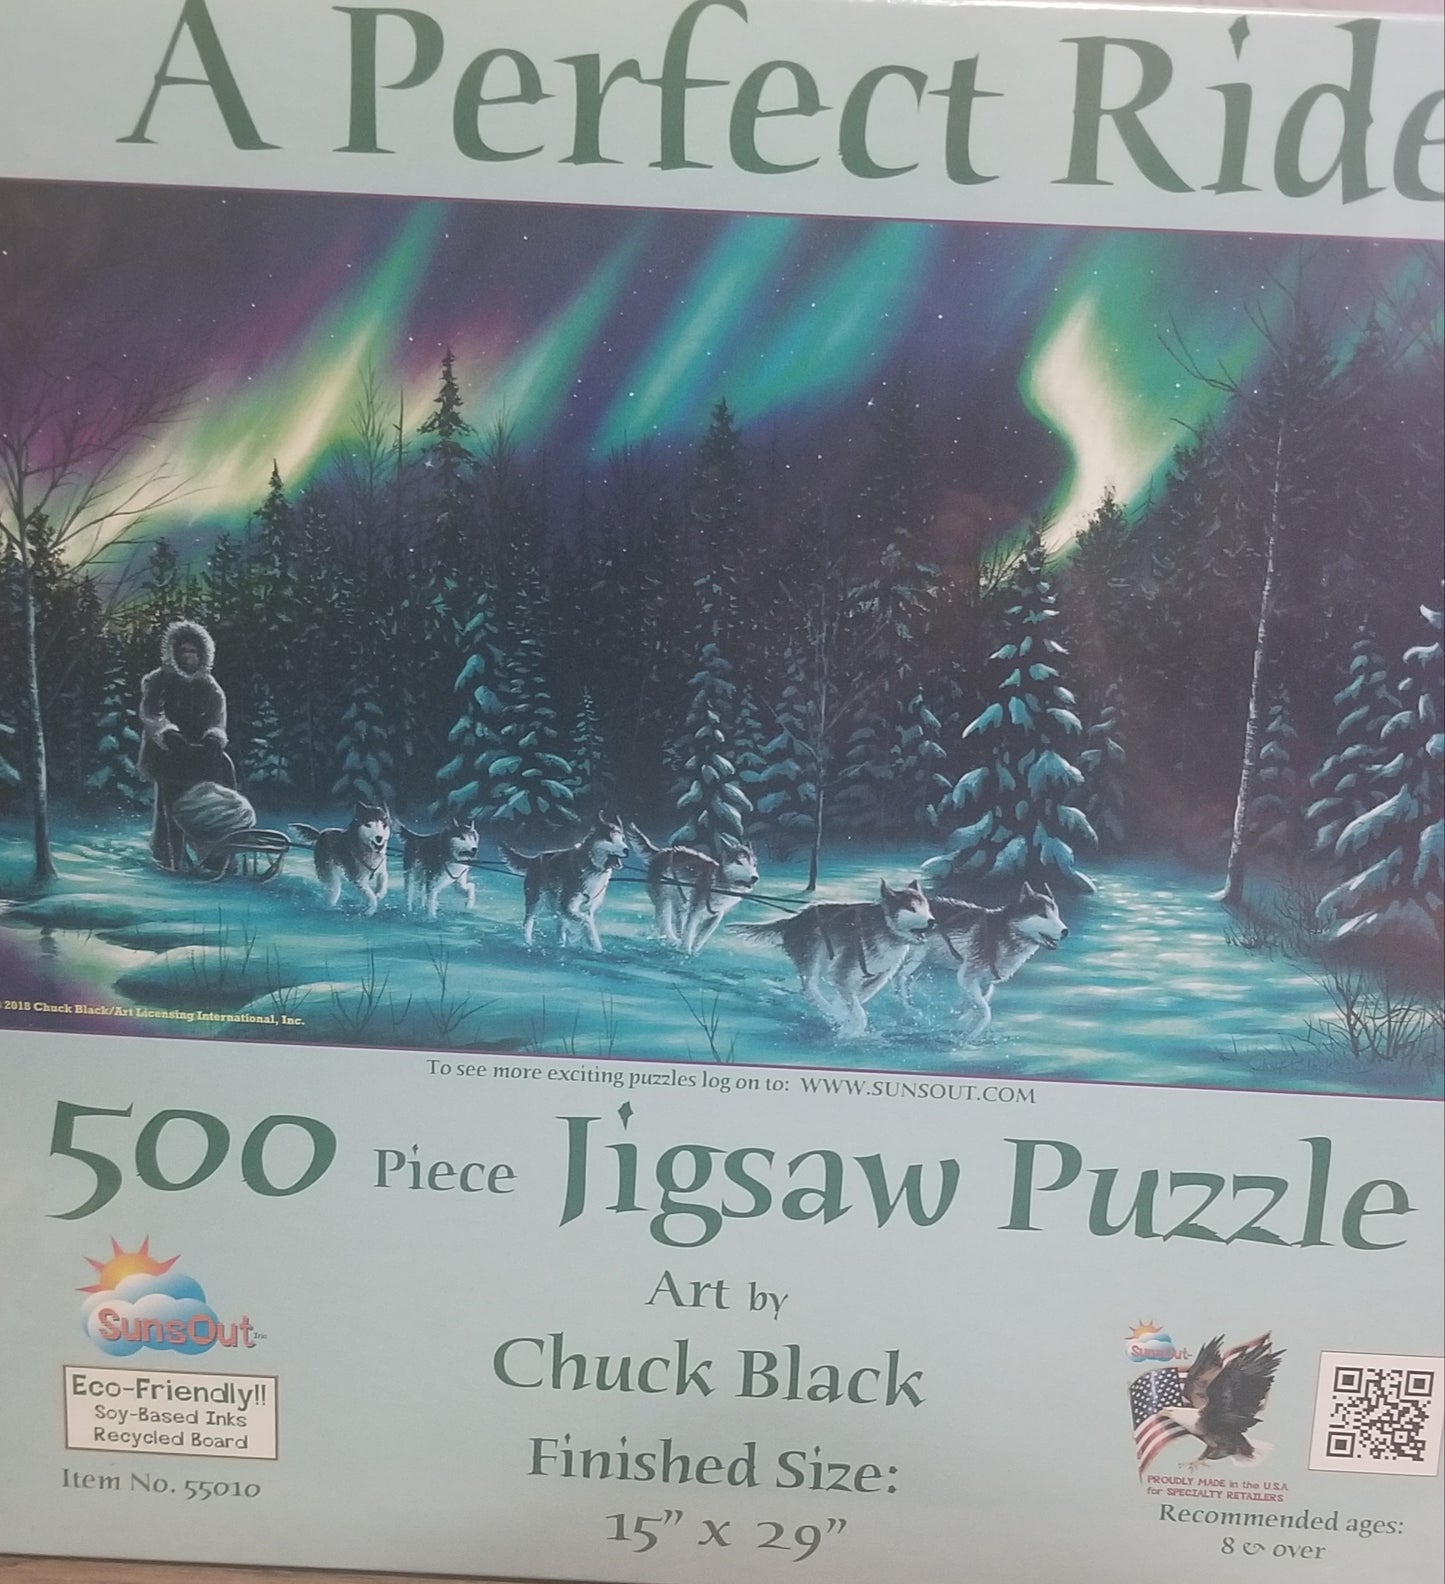 A Perfect Ride by Chuck Black, 500 Piece Puzzle